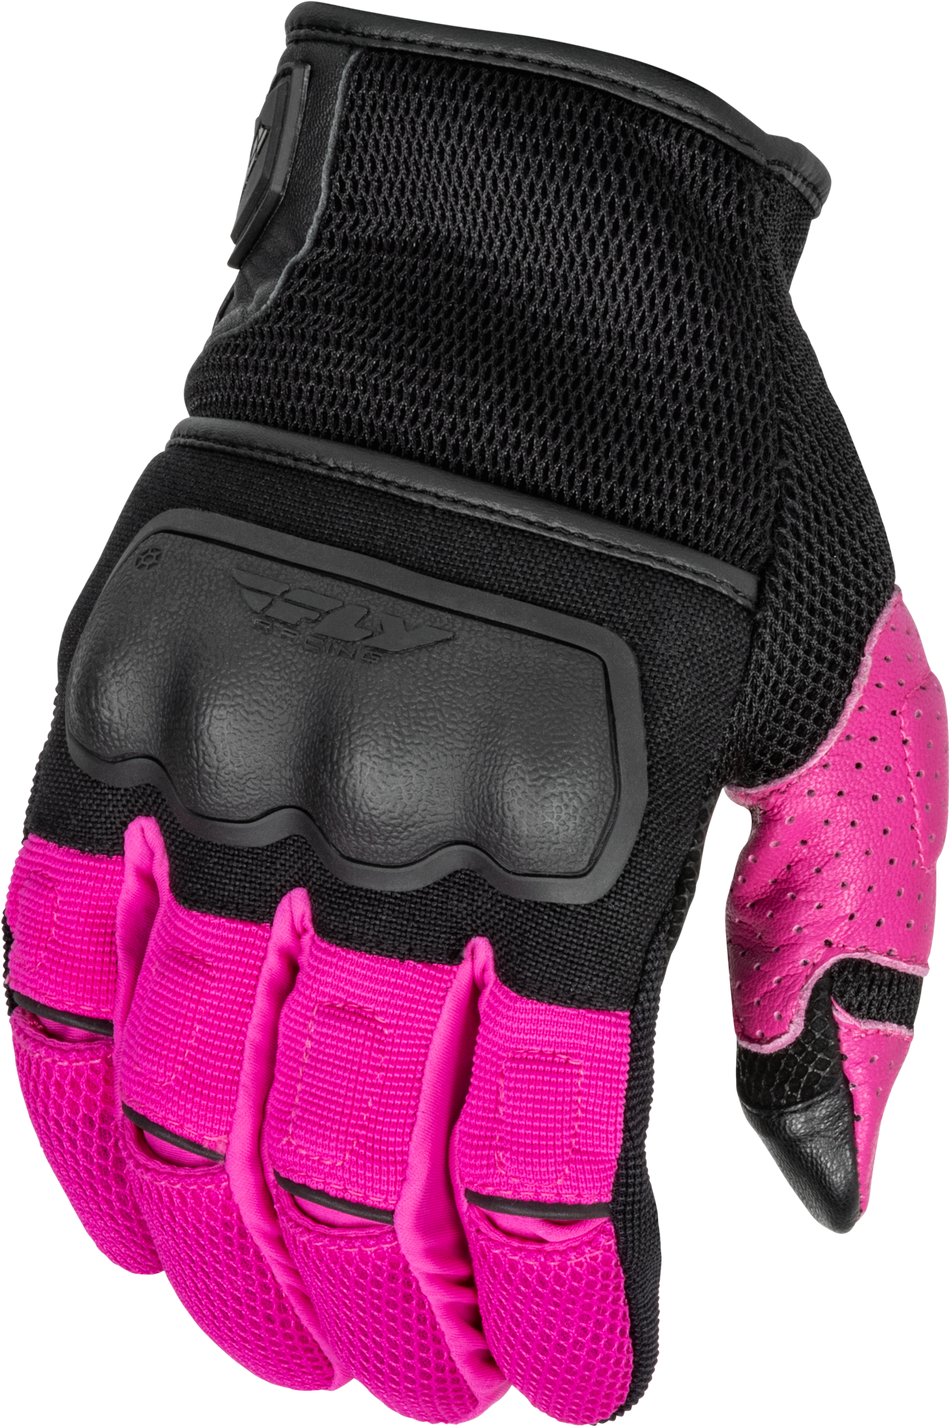 FLY RACING Women's Coolpro Force Gloves Black/Pink 3x 476-63023X